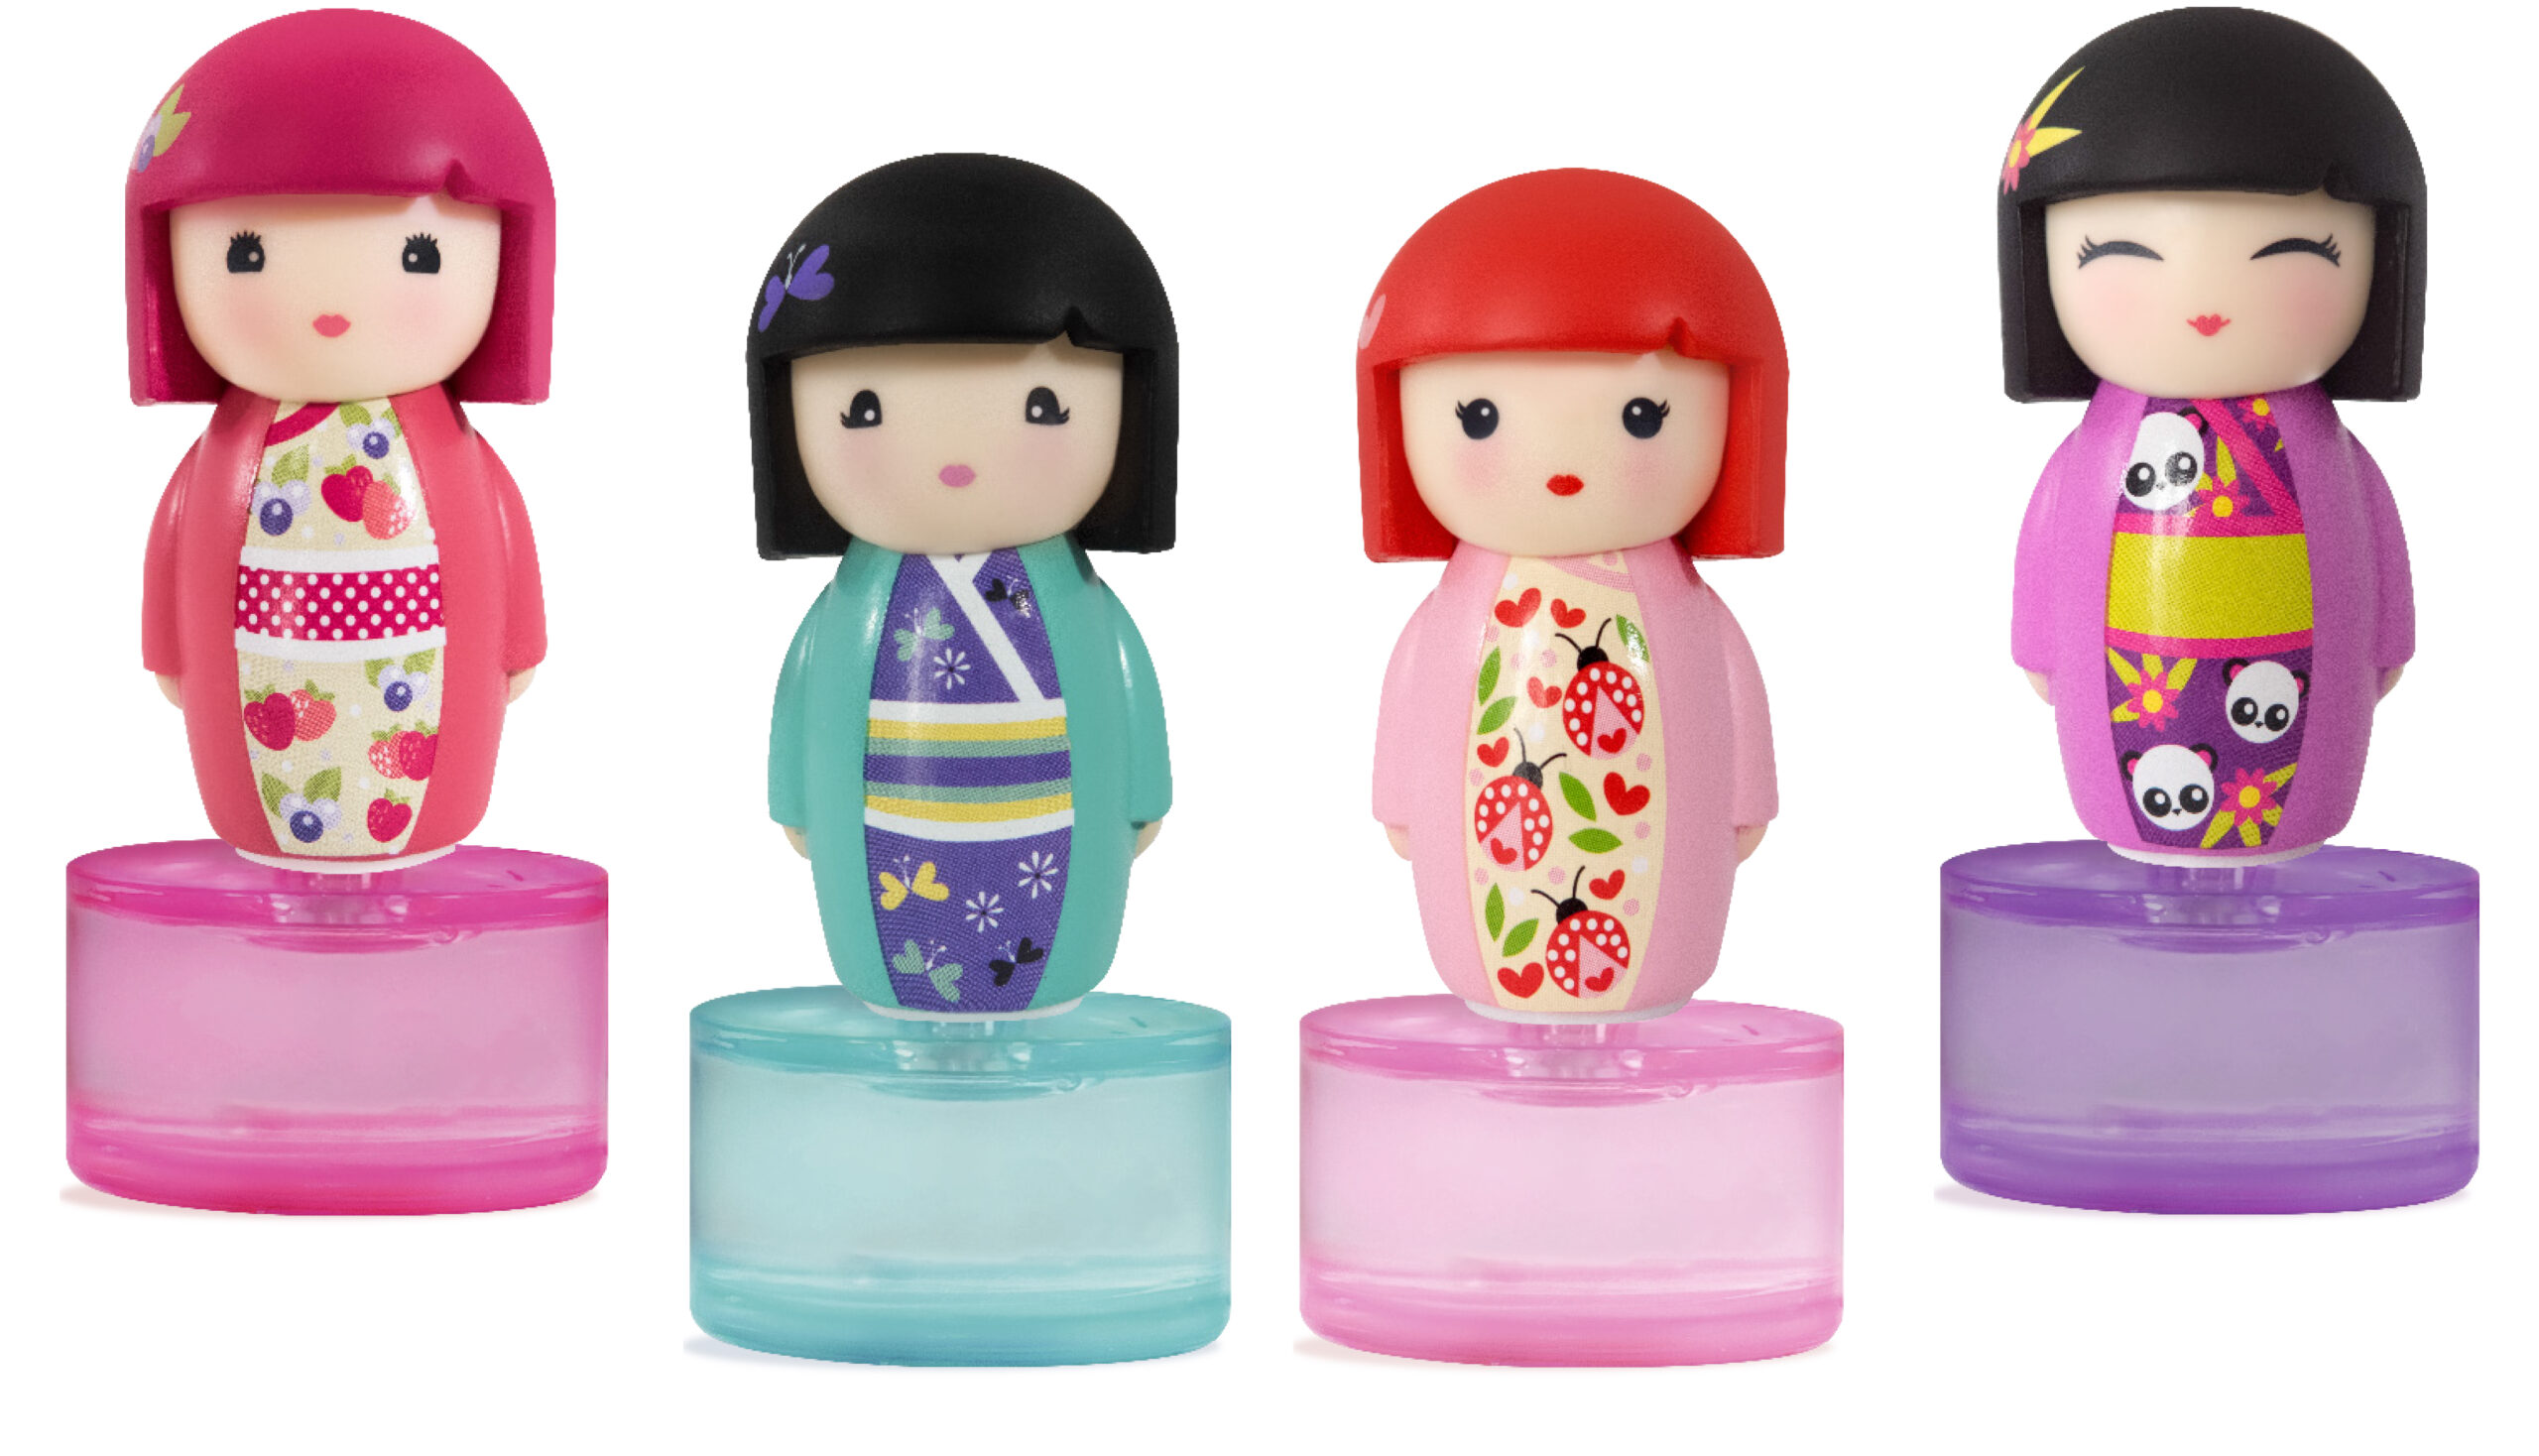 Kimmi Fragrance miniatures come complete with a lacquered figurine keepsake